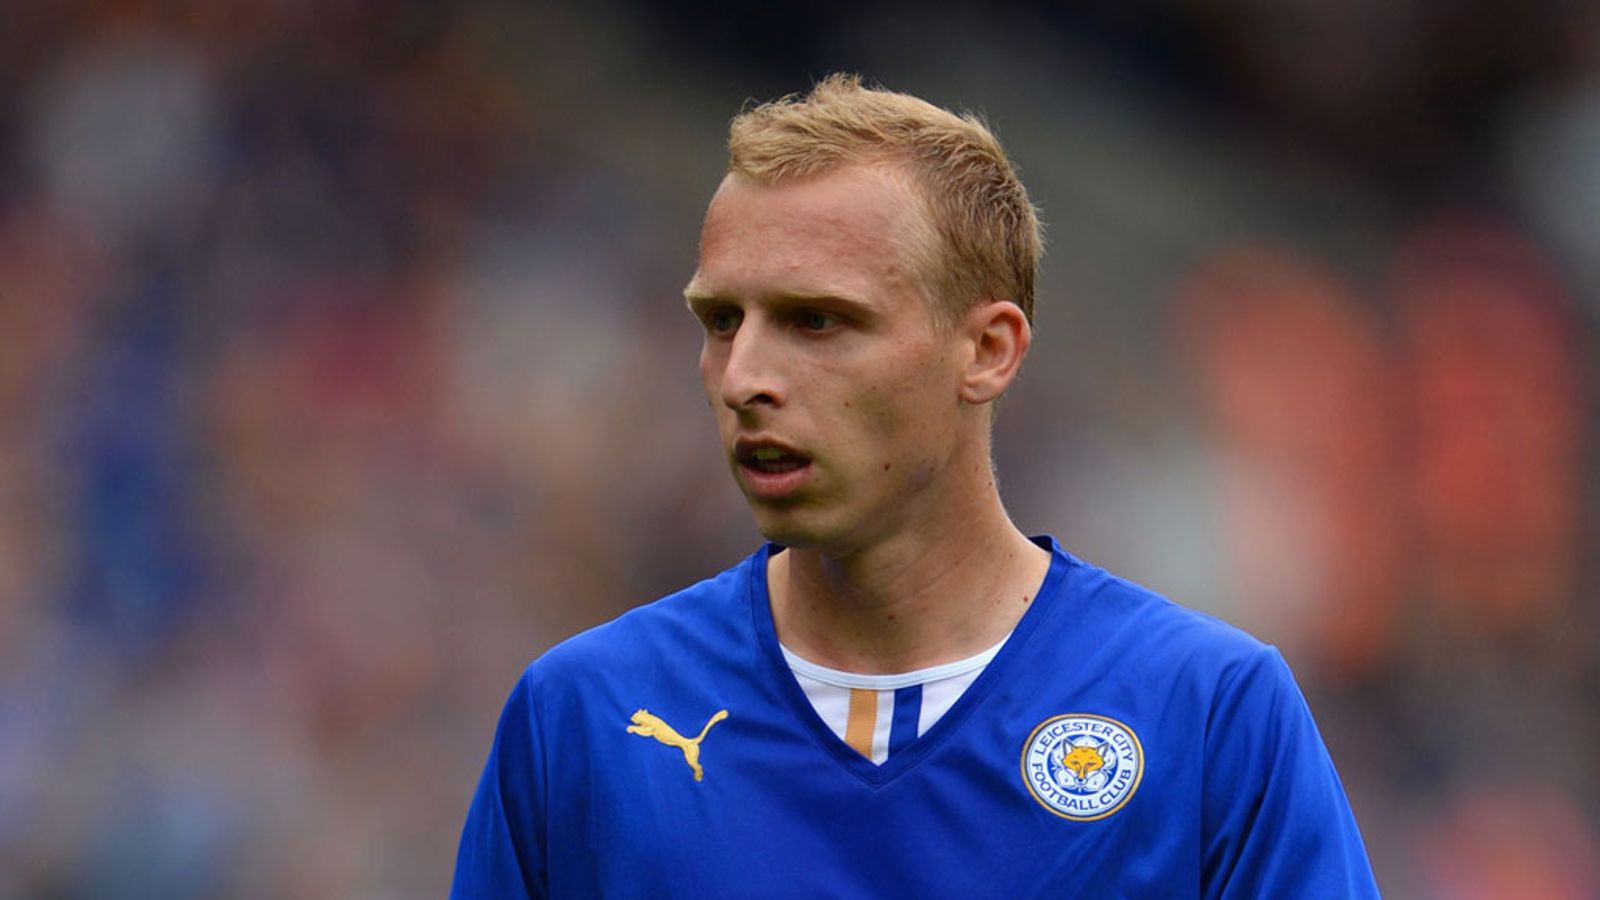 Sky Bet Championship: Ritchie De Laet insists Leicester City are staying gr...